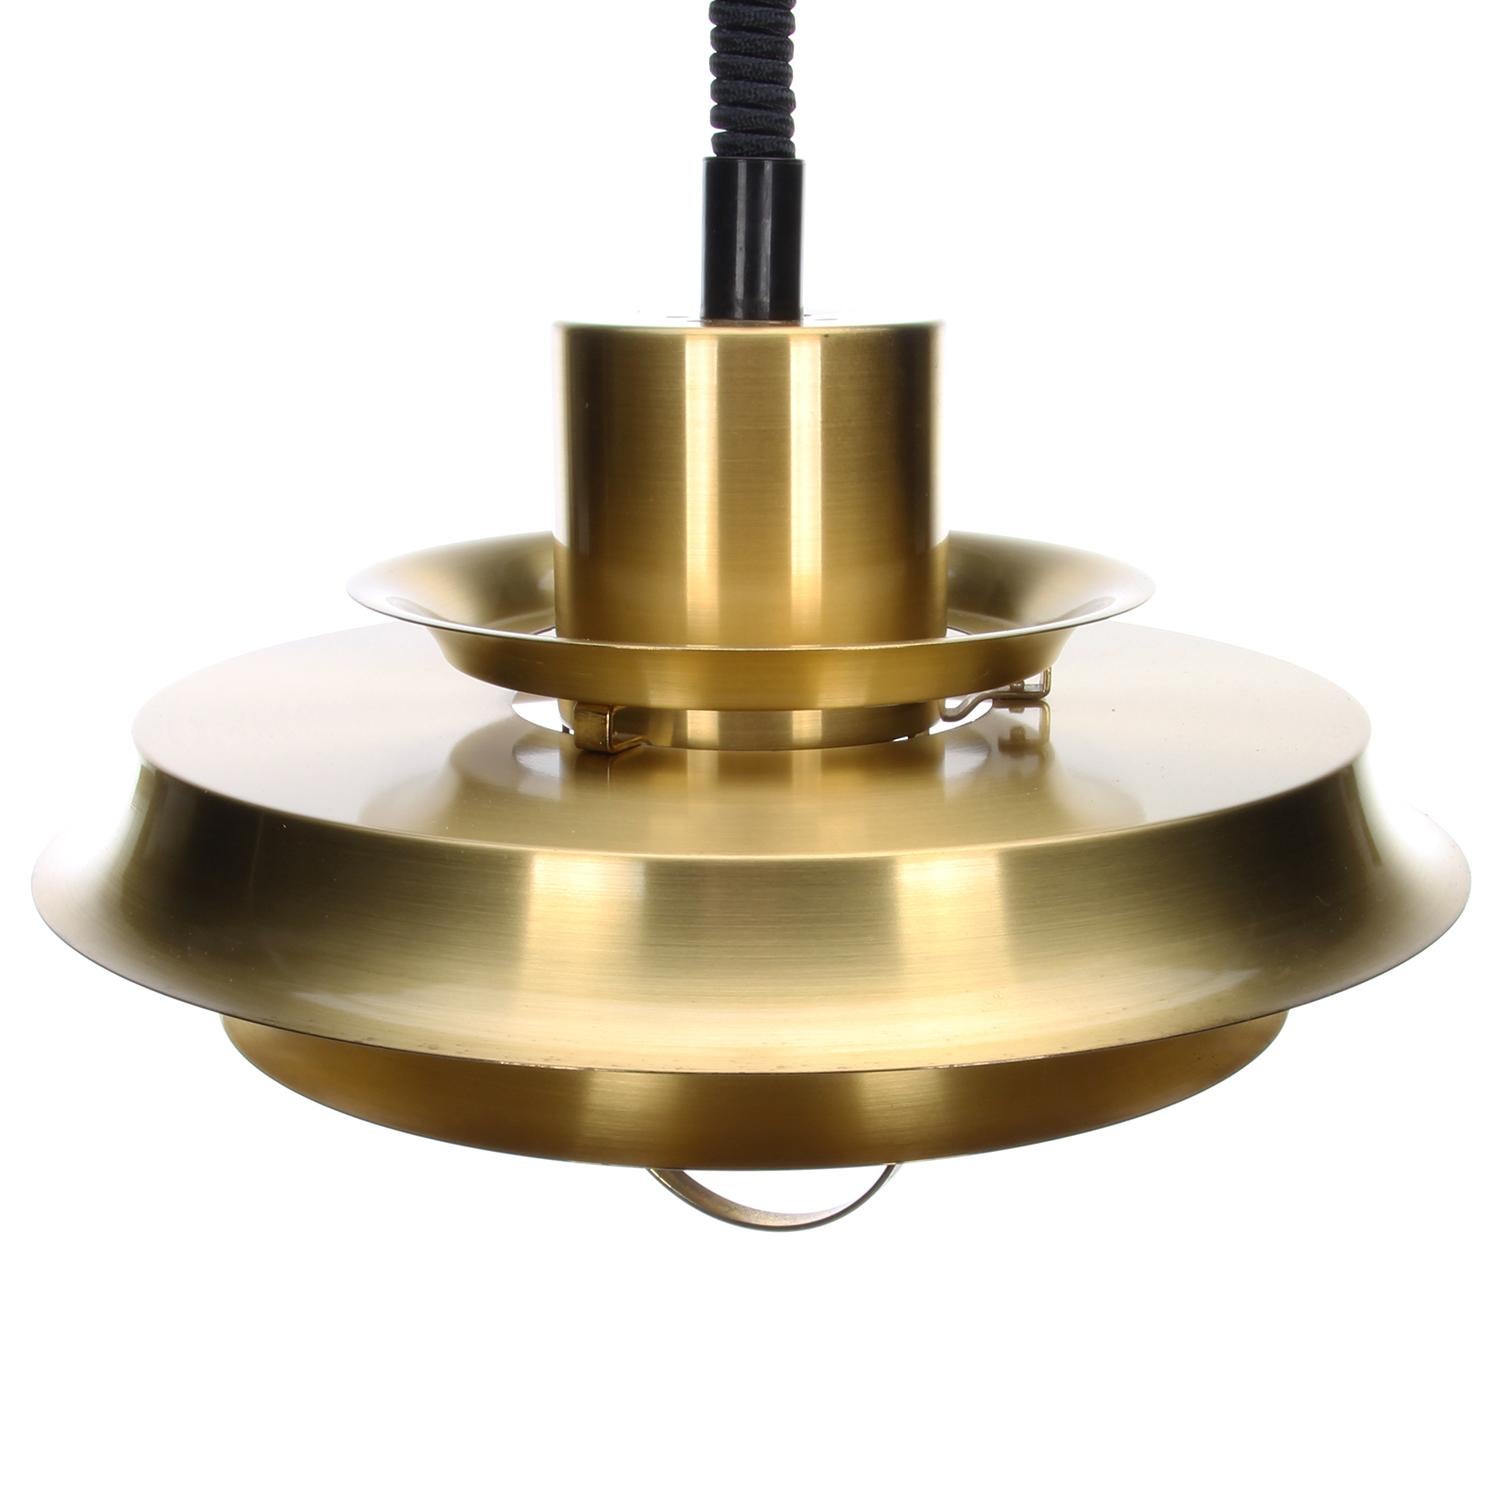 Mid-20th Century Brass Pendant by Vitrika 1960s Danish Vintage Lamp with Rise-and-fall Suspension